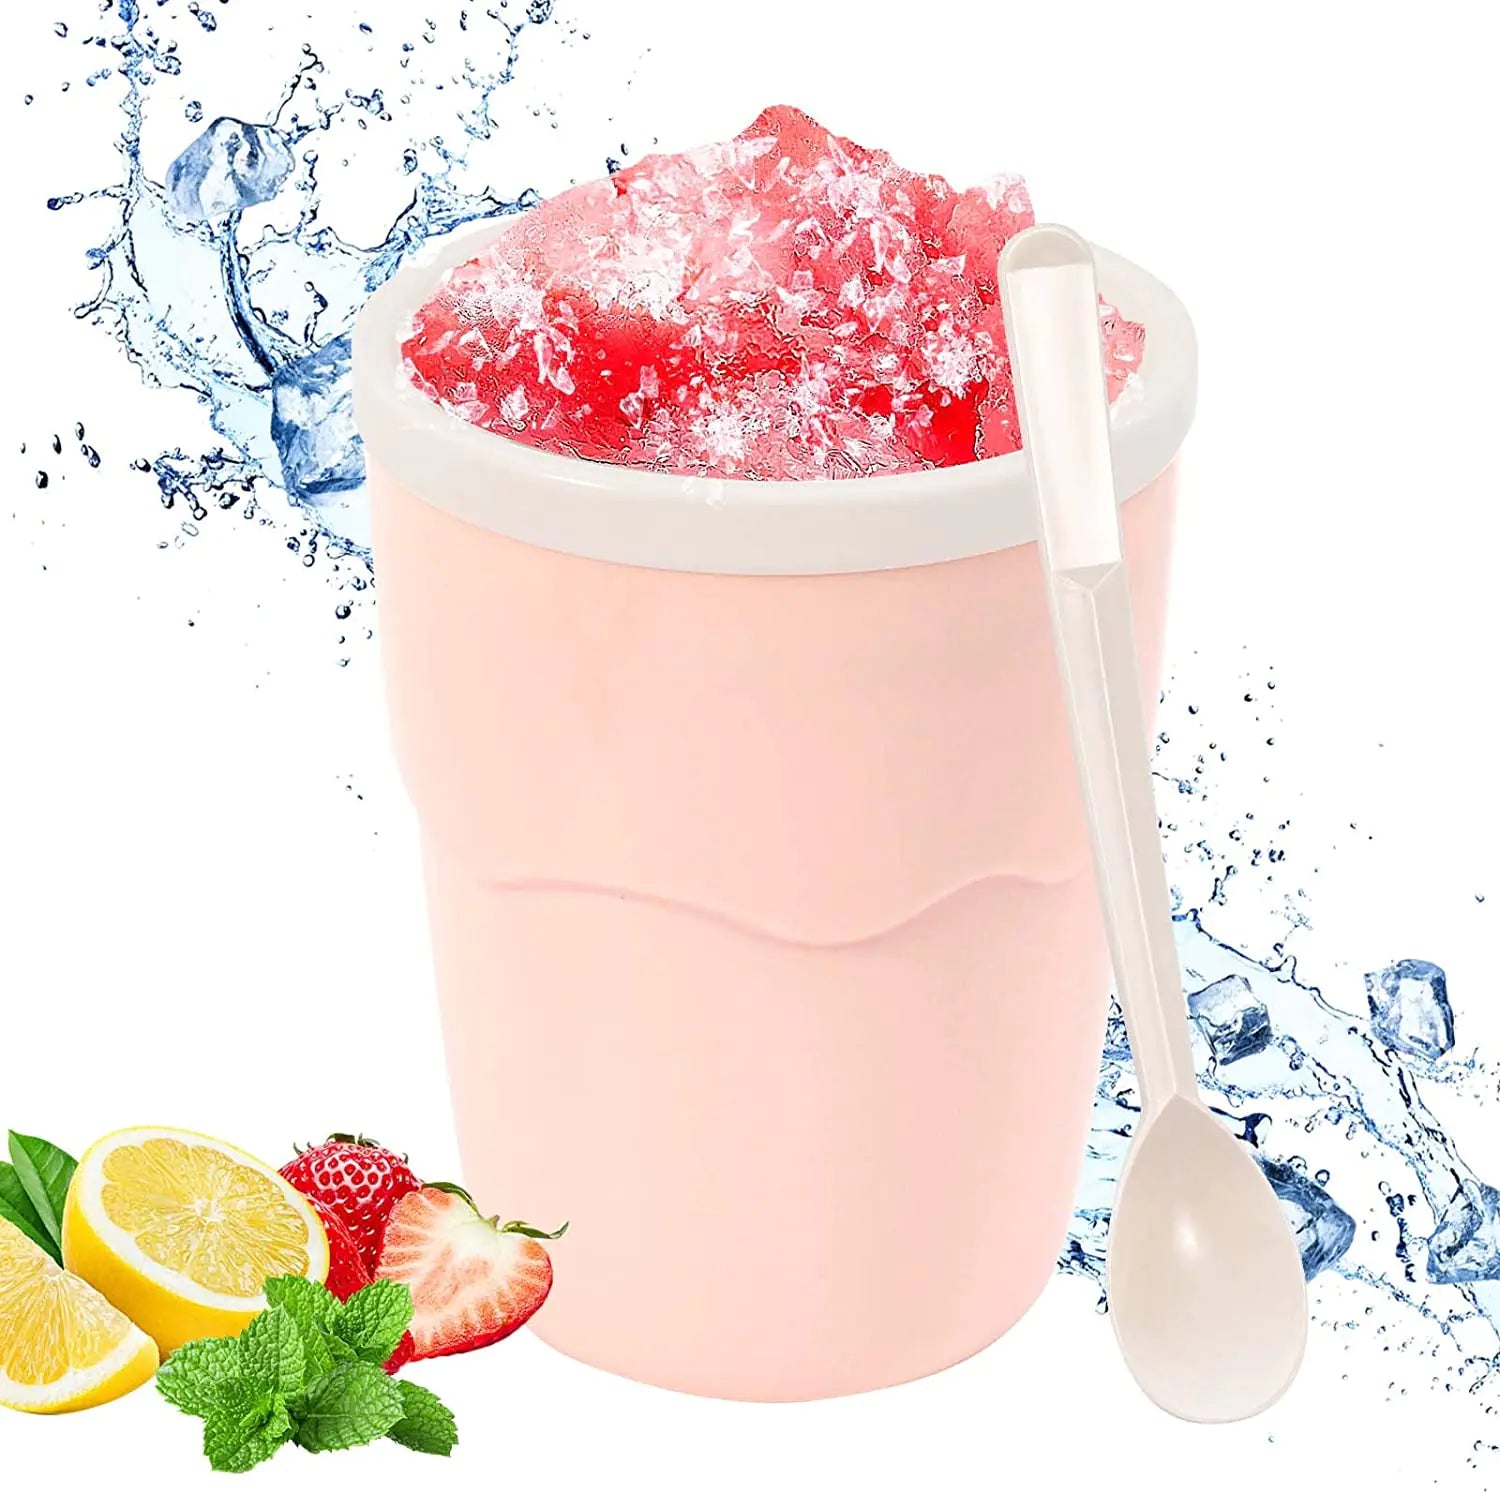 Frosty Smoothie Maker: Quick Freeze